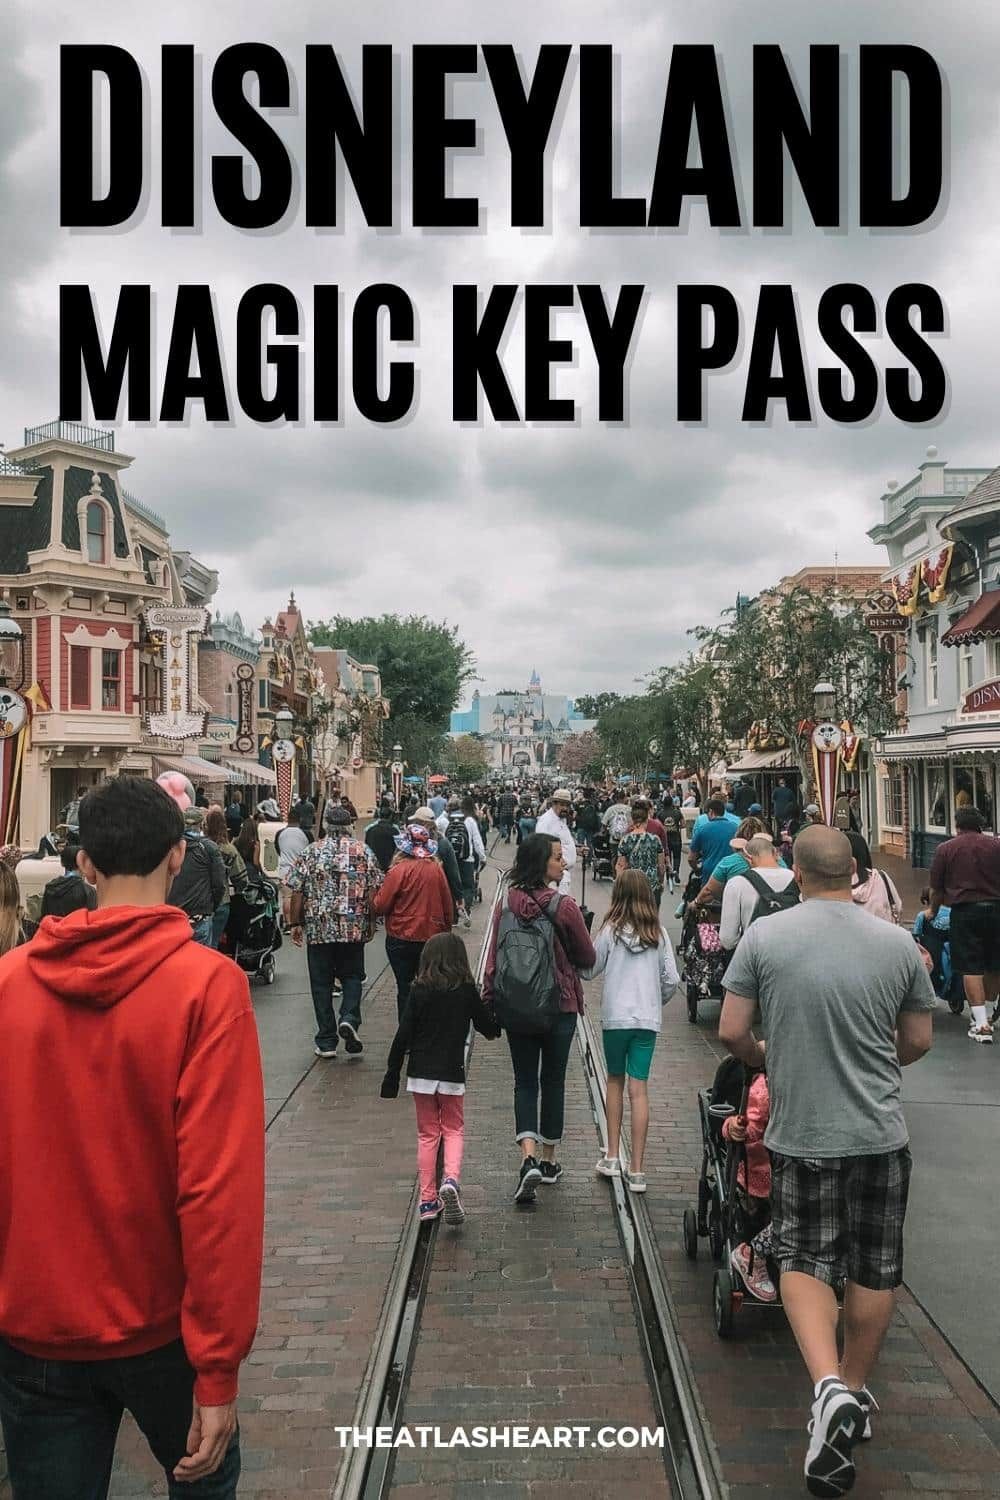 Disneyland Magic Key Pass: The Ultimate Guide From an Avid Park Goer and Pass Holder